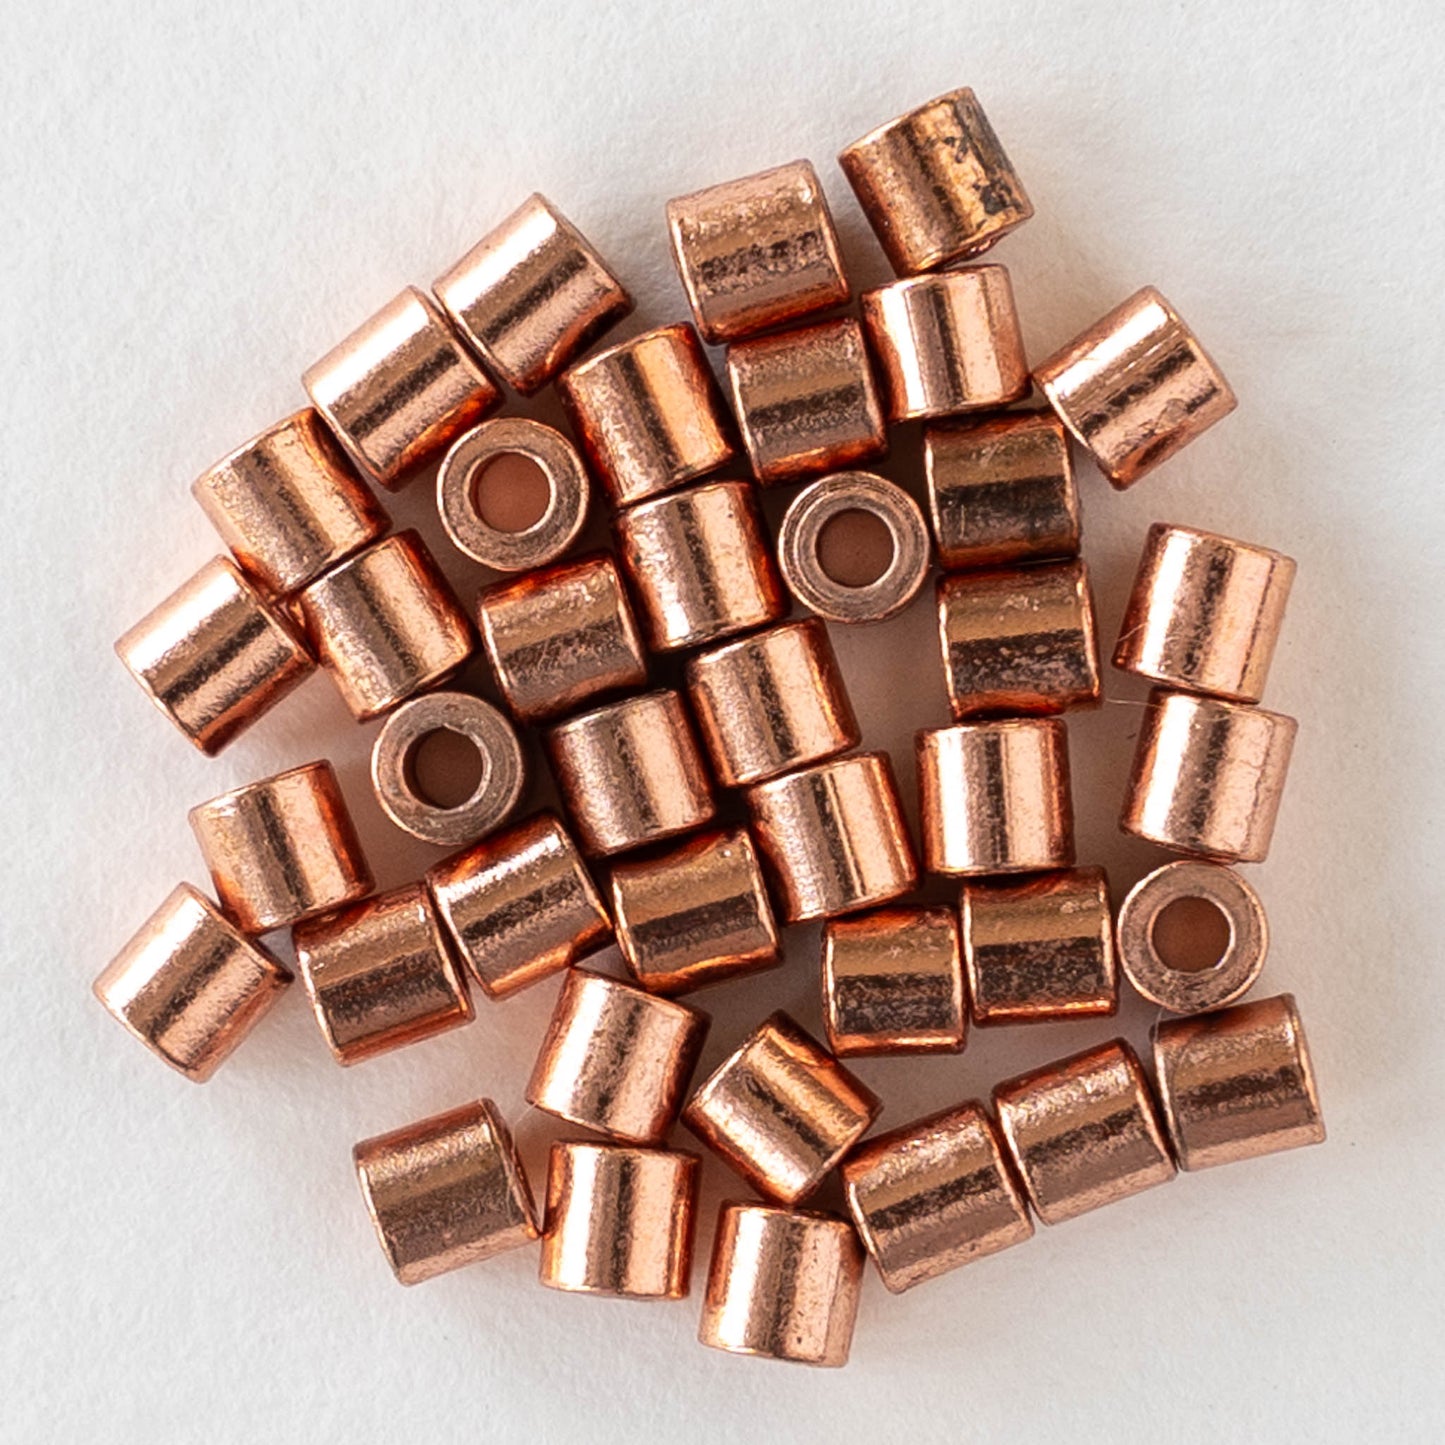 3mm Copper Plated Brass Tube Beads - 3mm - 50